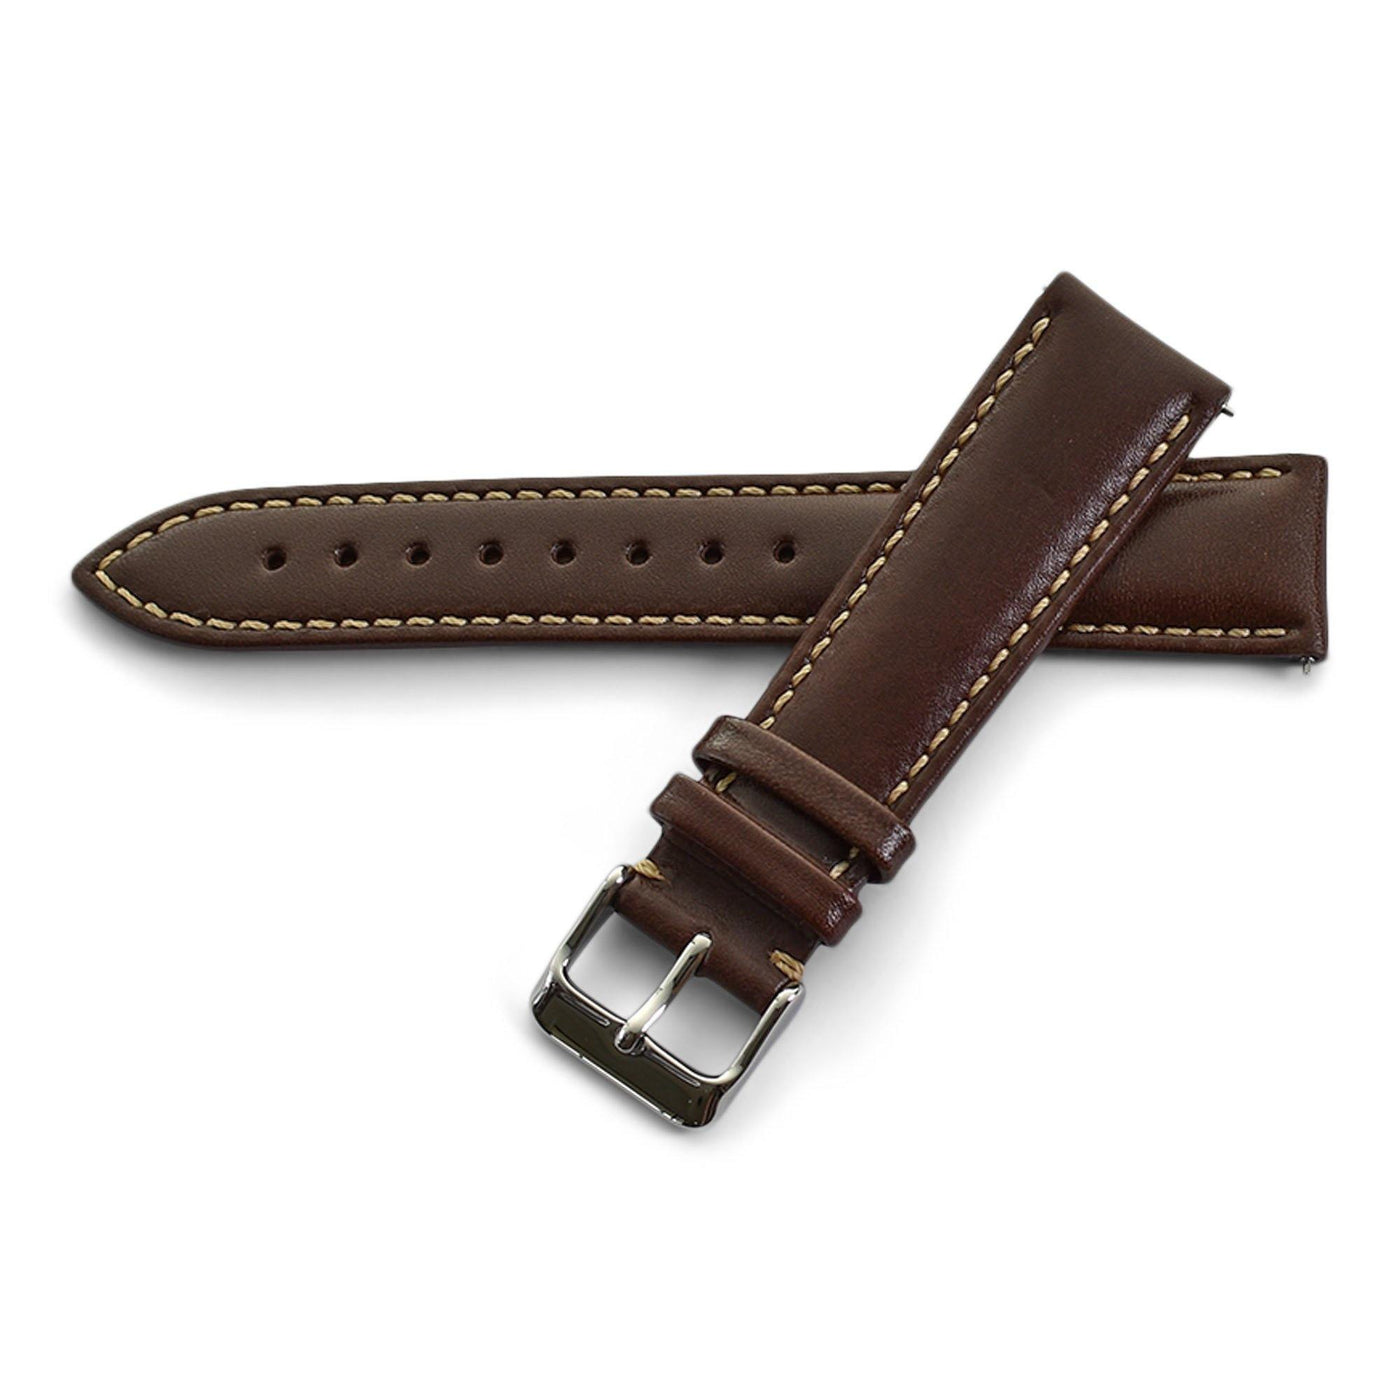 THE CHELSEA QUICK RELEASE DARK BROWN - The Sydney Strap Co.